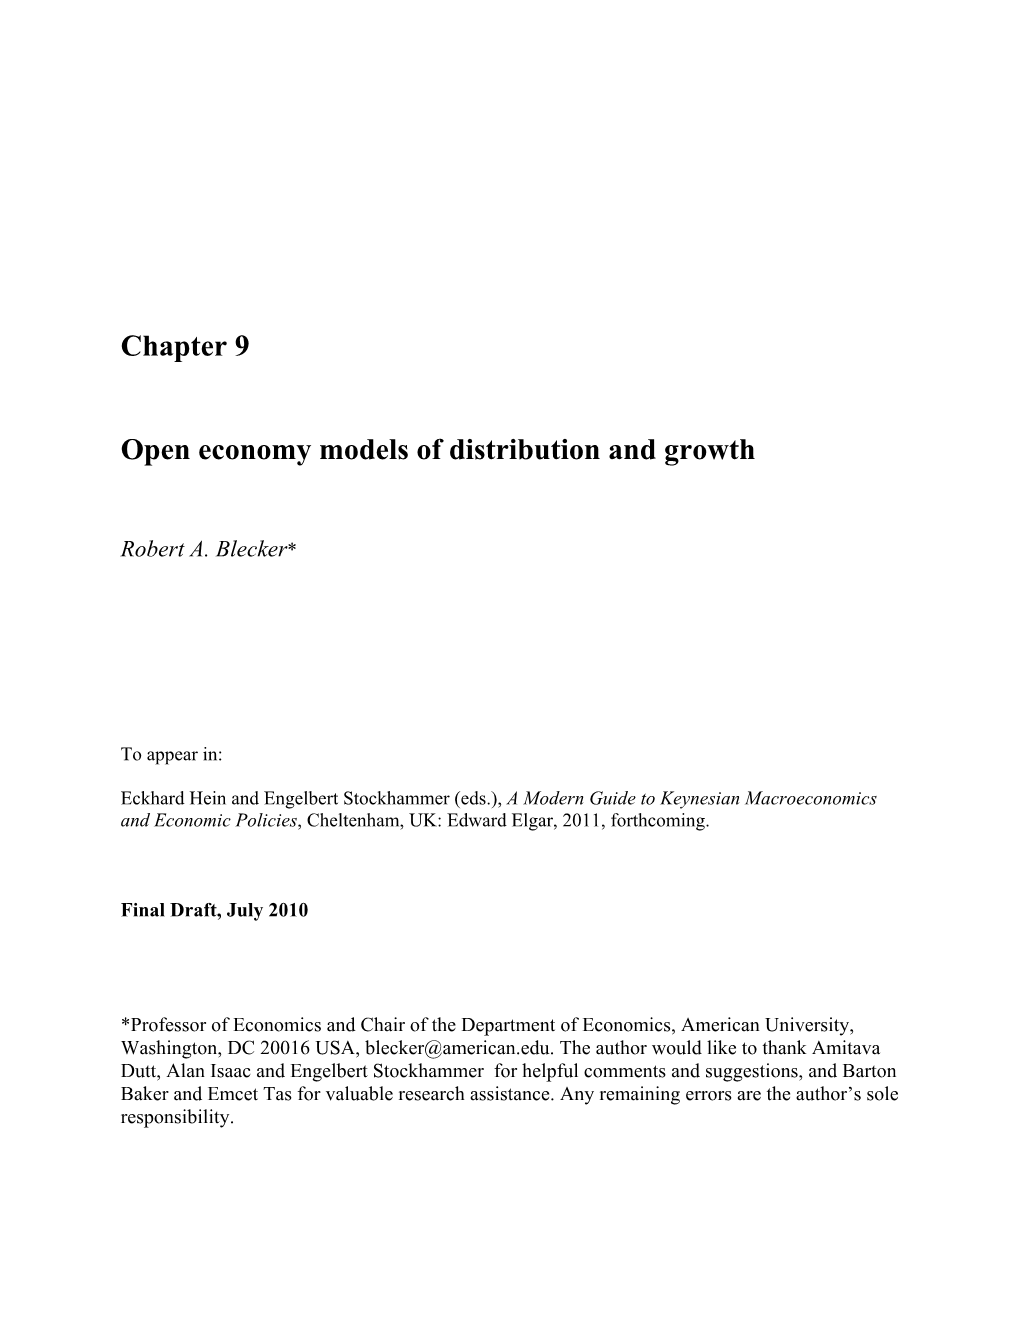 Chapter 9 Open Economy Models of Distribution and Growth